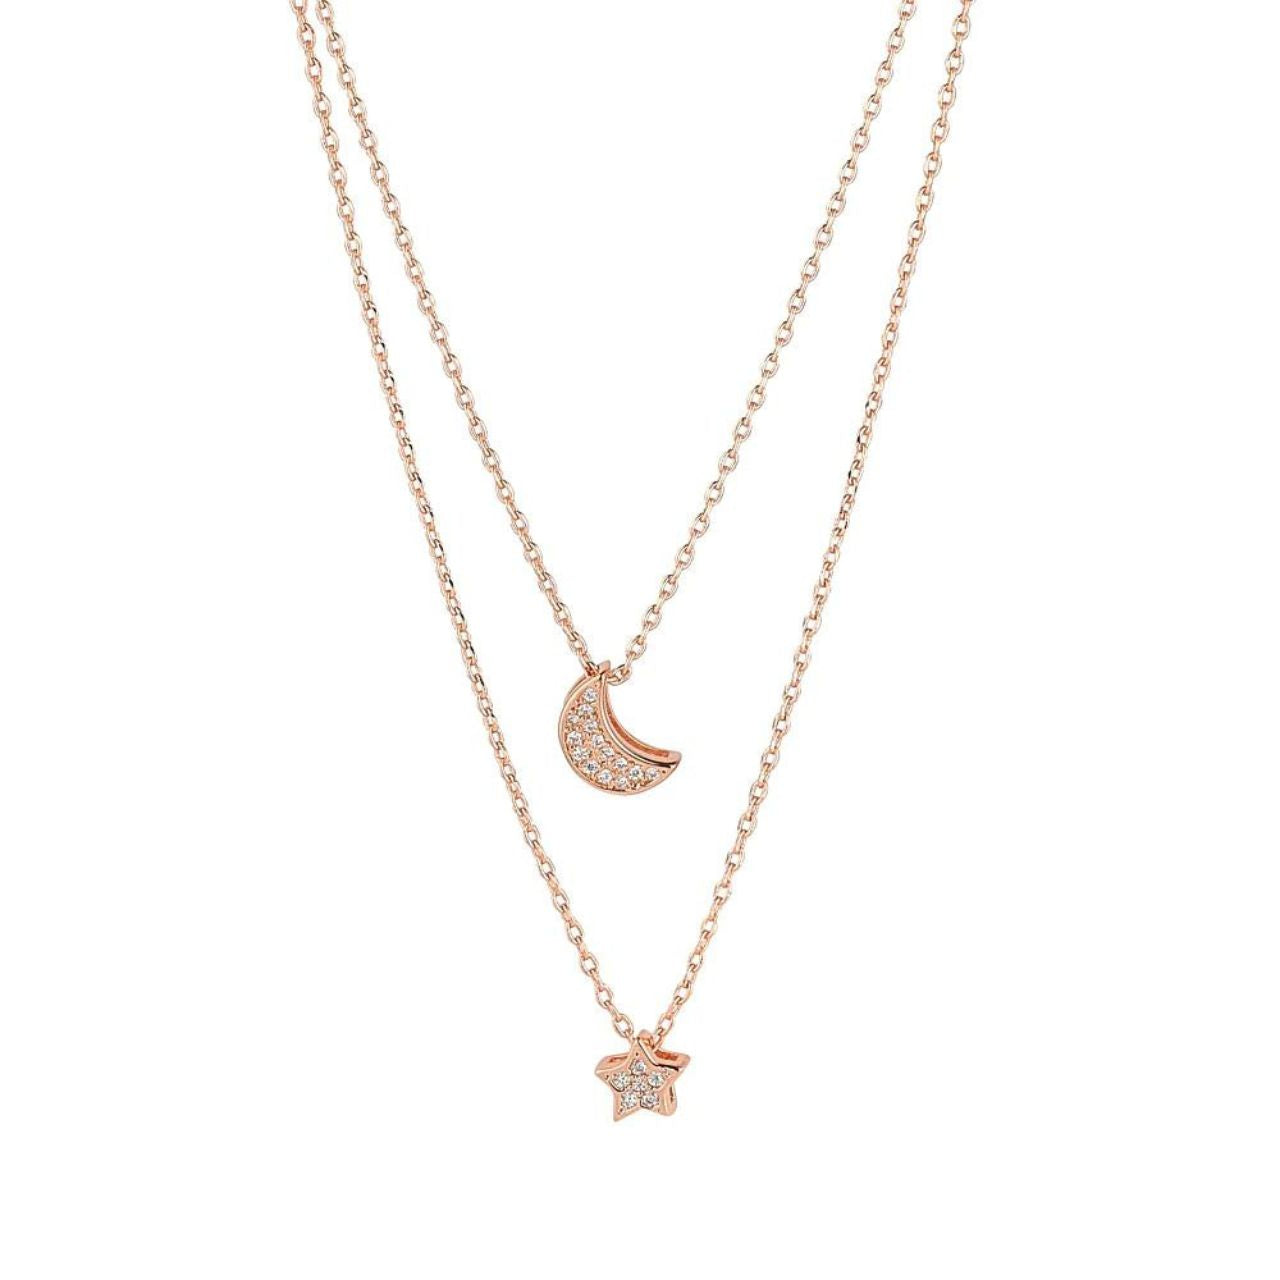 Knight & Day Duo Moon & Star Necklace  Set of two necklace with chains threaded through miniature star & moon shapes, embellished with CZ stones. Length 40 + 5cm. Rose gold plating.